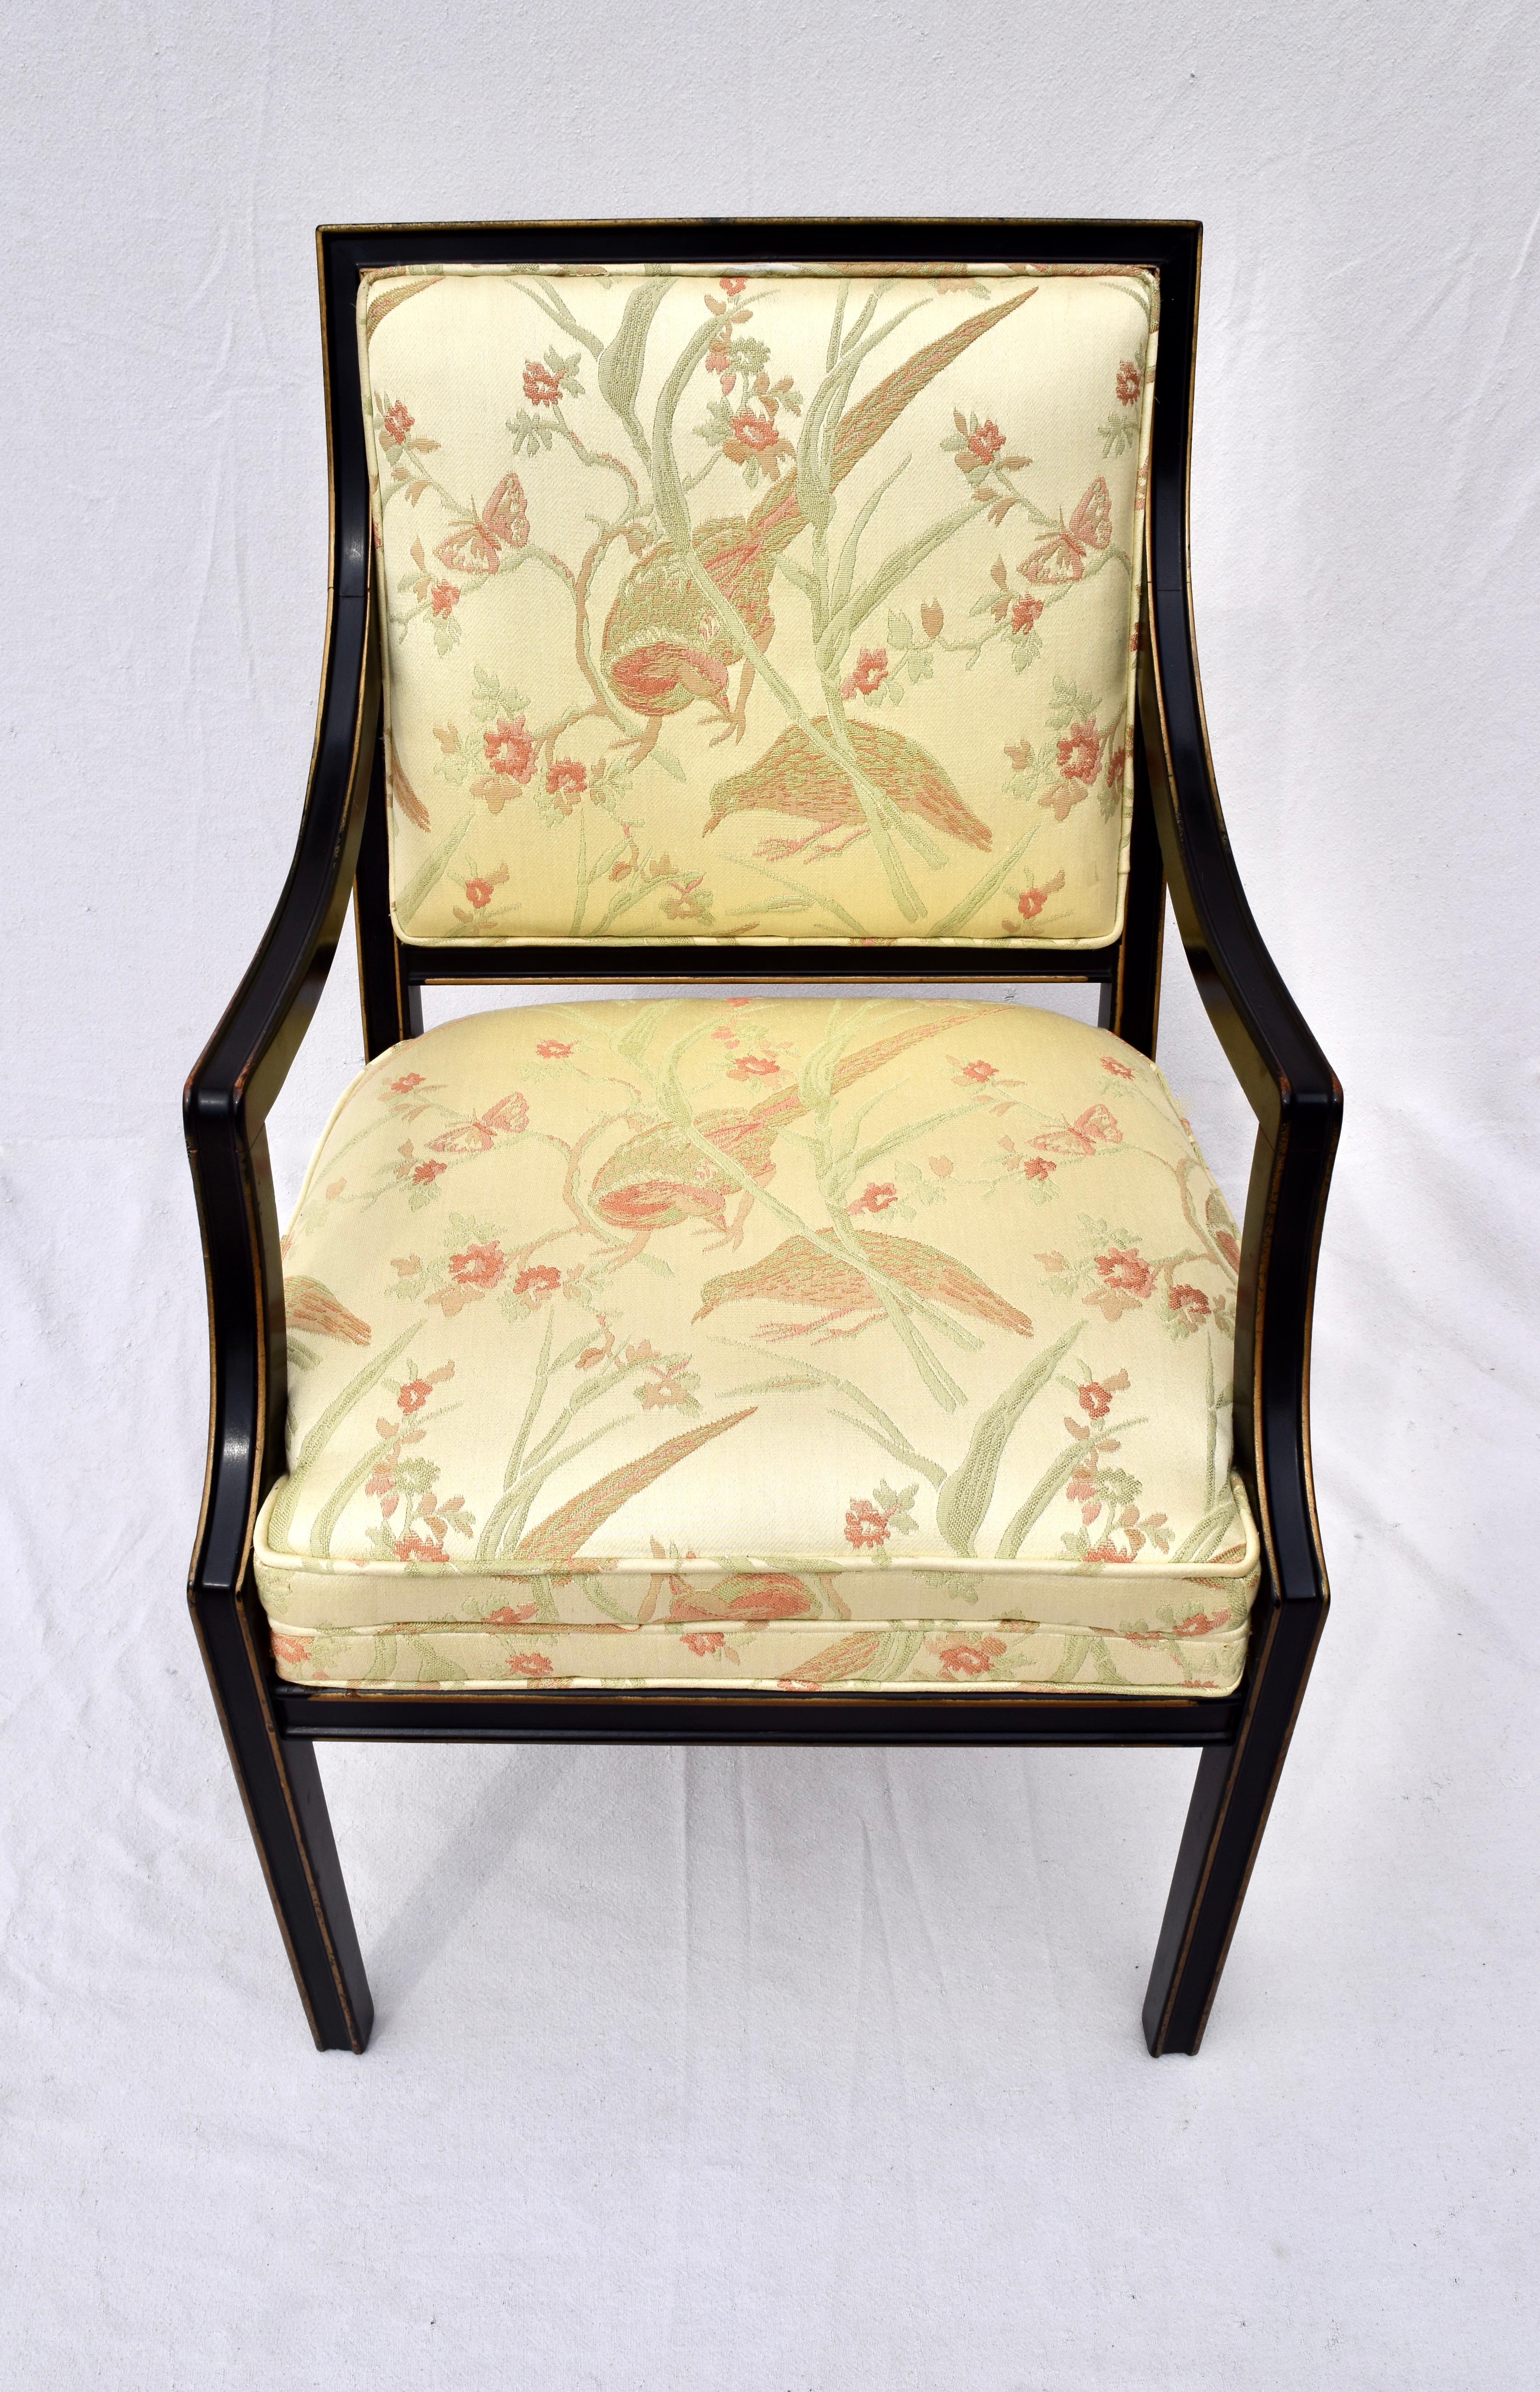 Classic Baker furniture armchair upholstered in designer Canary & Salmon brocade fabric with black lacquer parcel gilt finish. Strong influence to Edward Wormley for Dunbar 